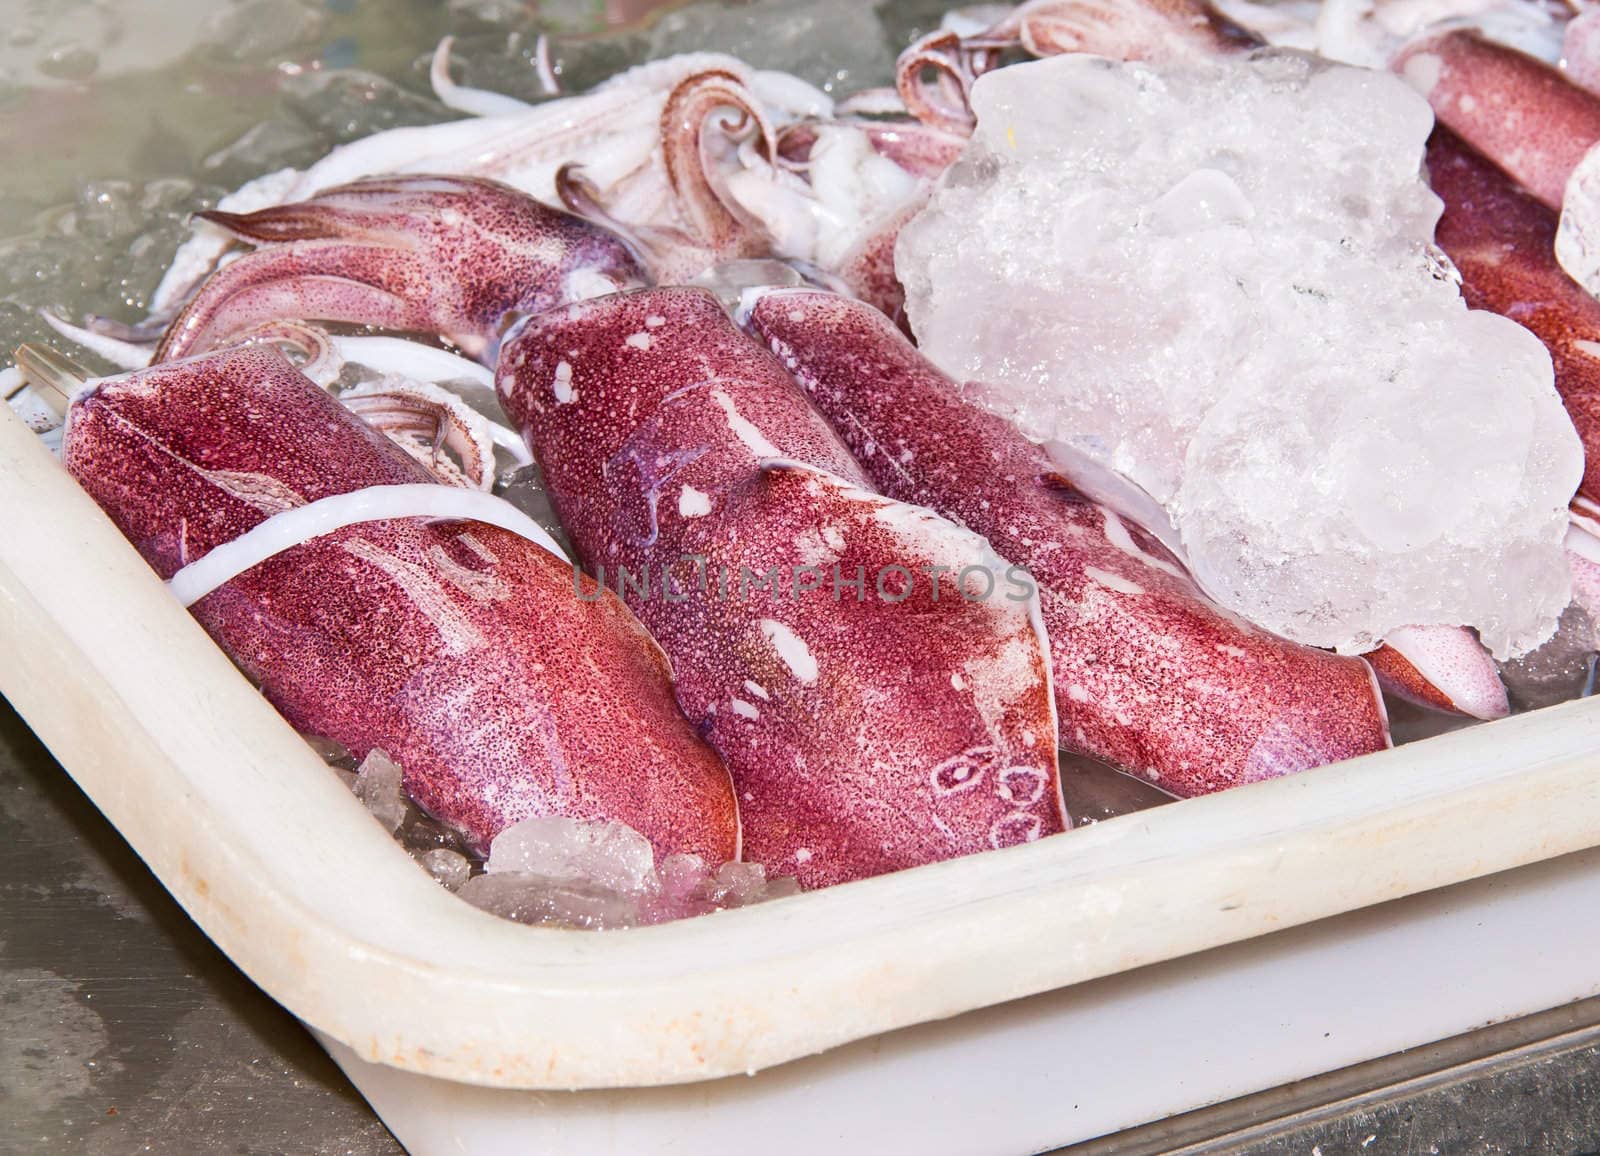 Squid was taken from the sea and immersed in ice in a plastic tray.